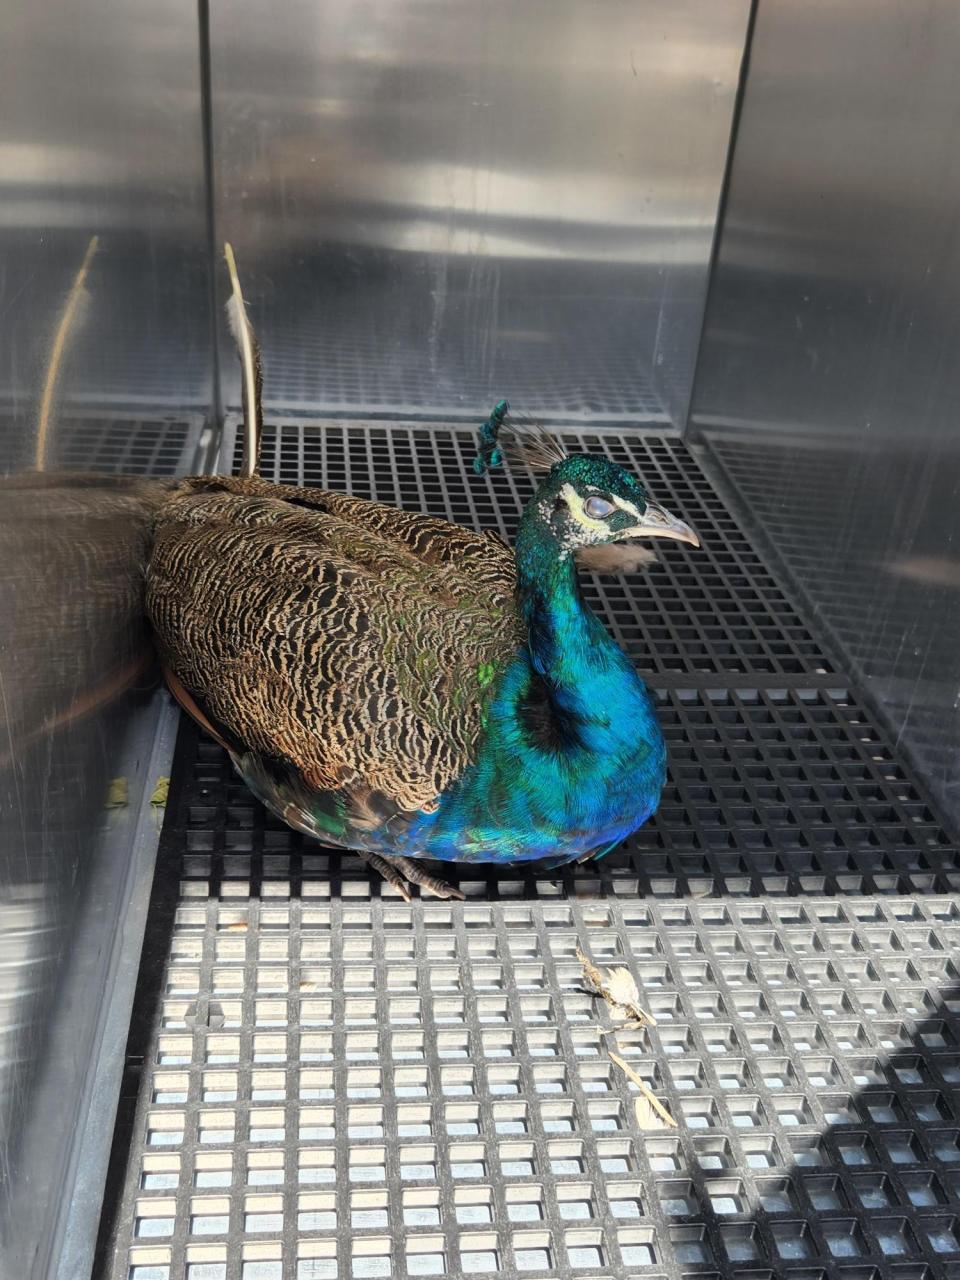 Des Moines' favorite wandering peacock was captured by the Animal Rescue League of Iowa, the state's largest animal shelter. The peacock had been on the move from treetop to rooftop since Aug. 3, 2022, ruffling feathers in the Merle Hay neighborhood.